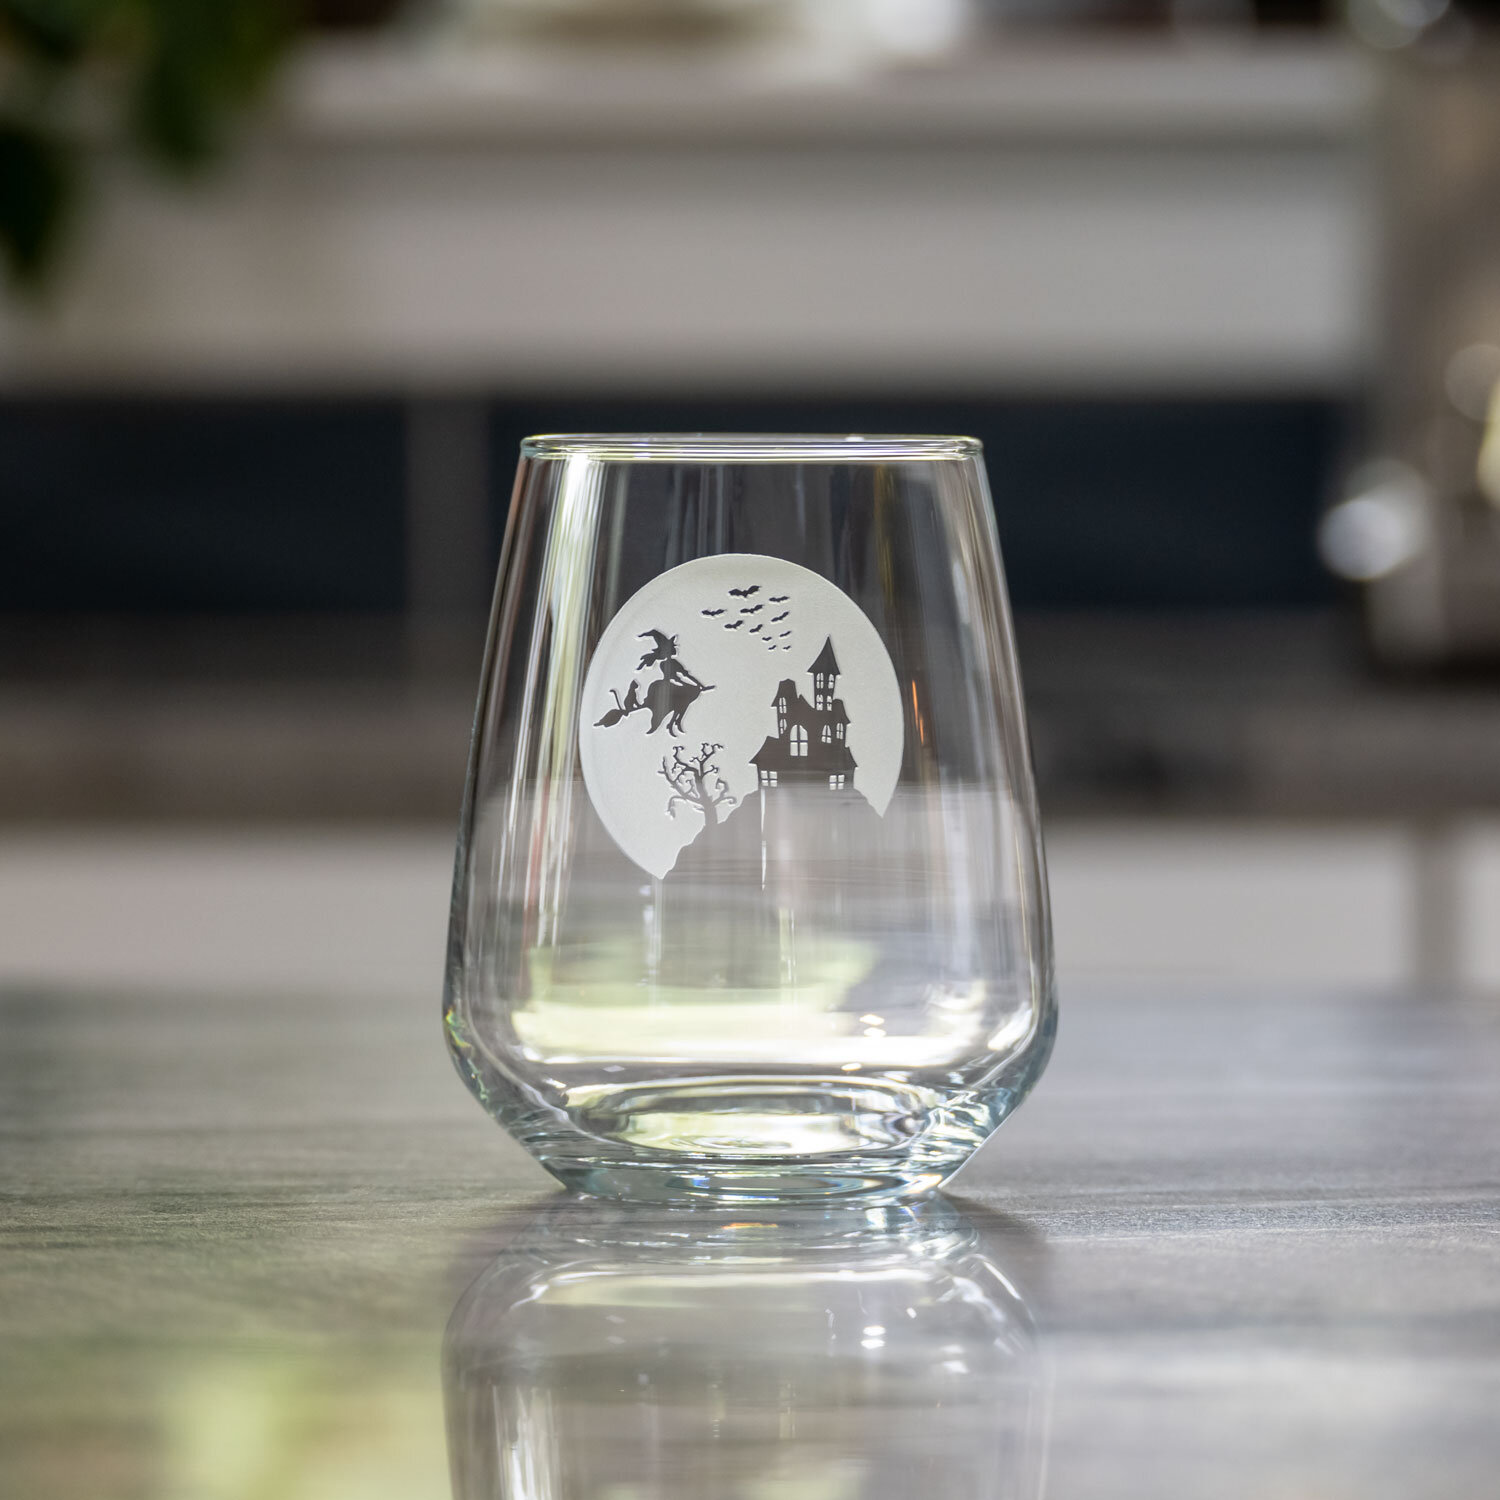 Walking on Glass, contemporary bespoke glass and crystal engraving